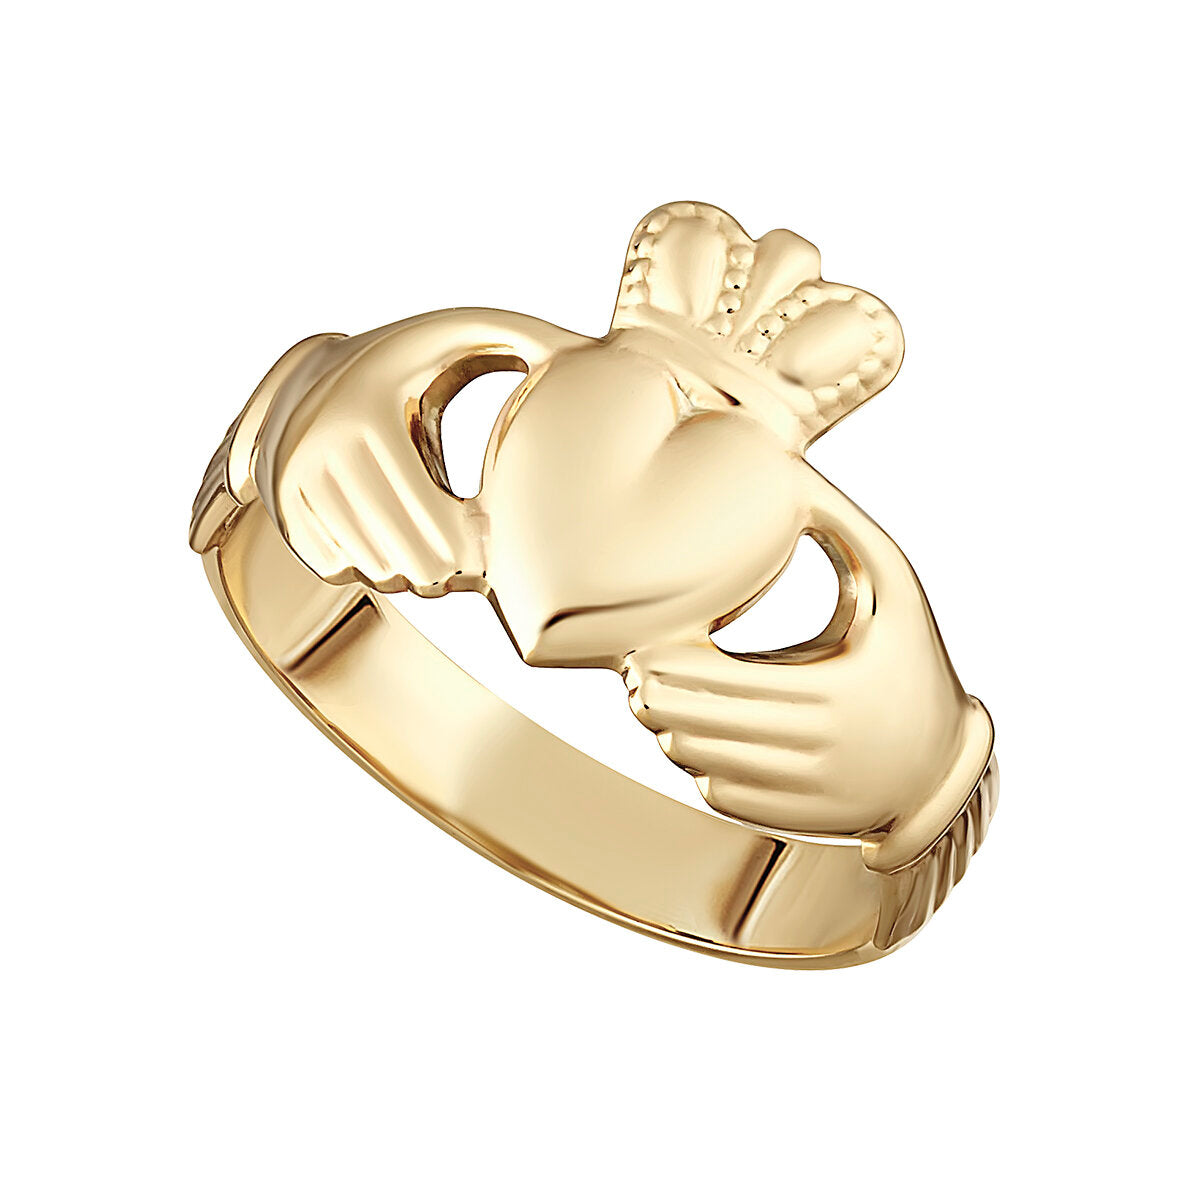 Gents 14K Gold Claddagh Ring